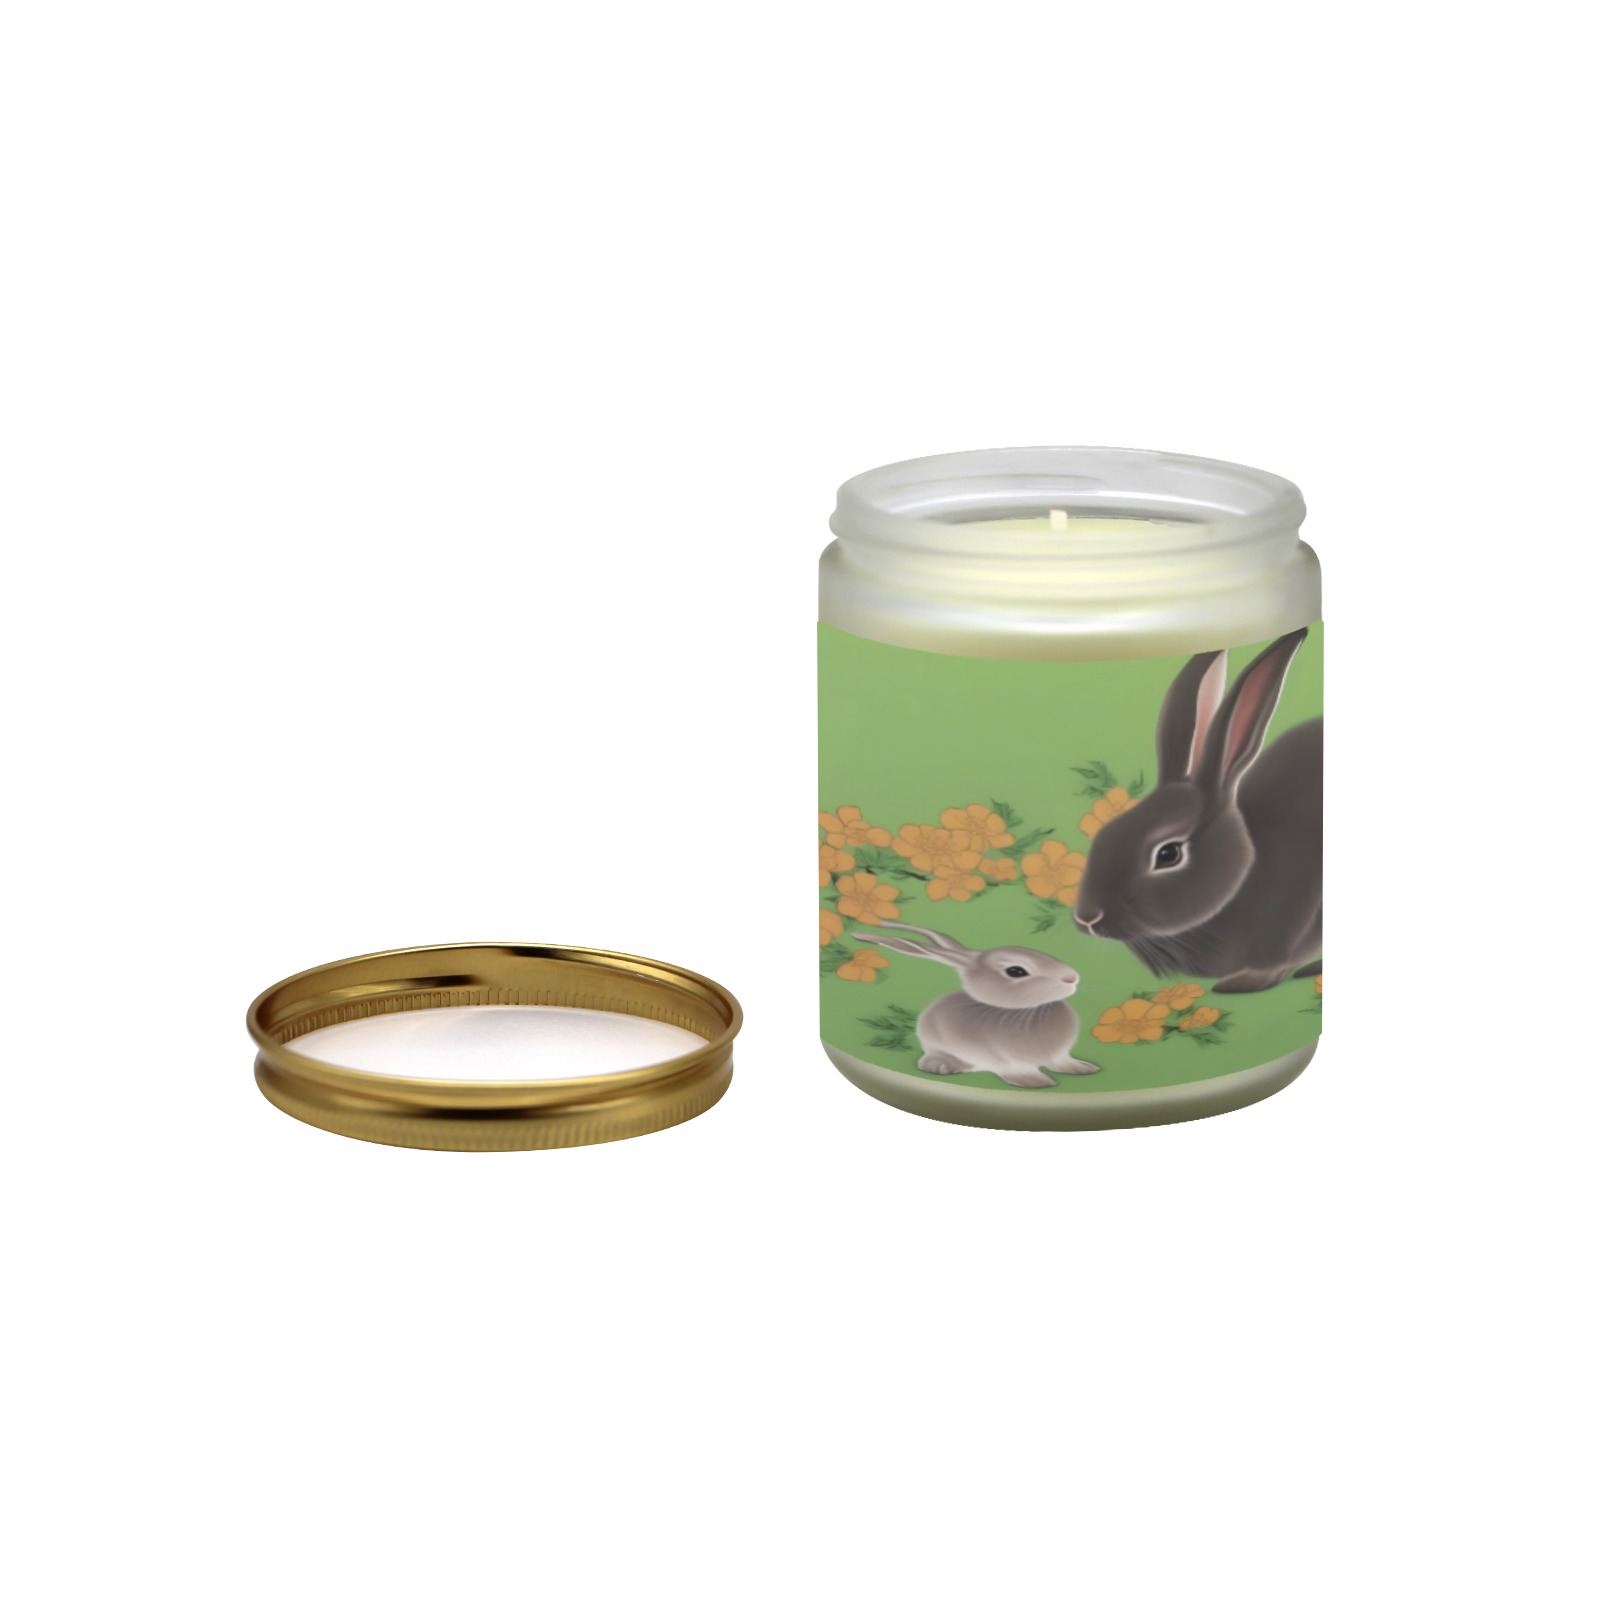 Rabbit and Kit Frosted Glass Candle Cup - Large Size (Lavender&Lemon)